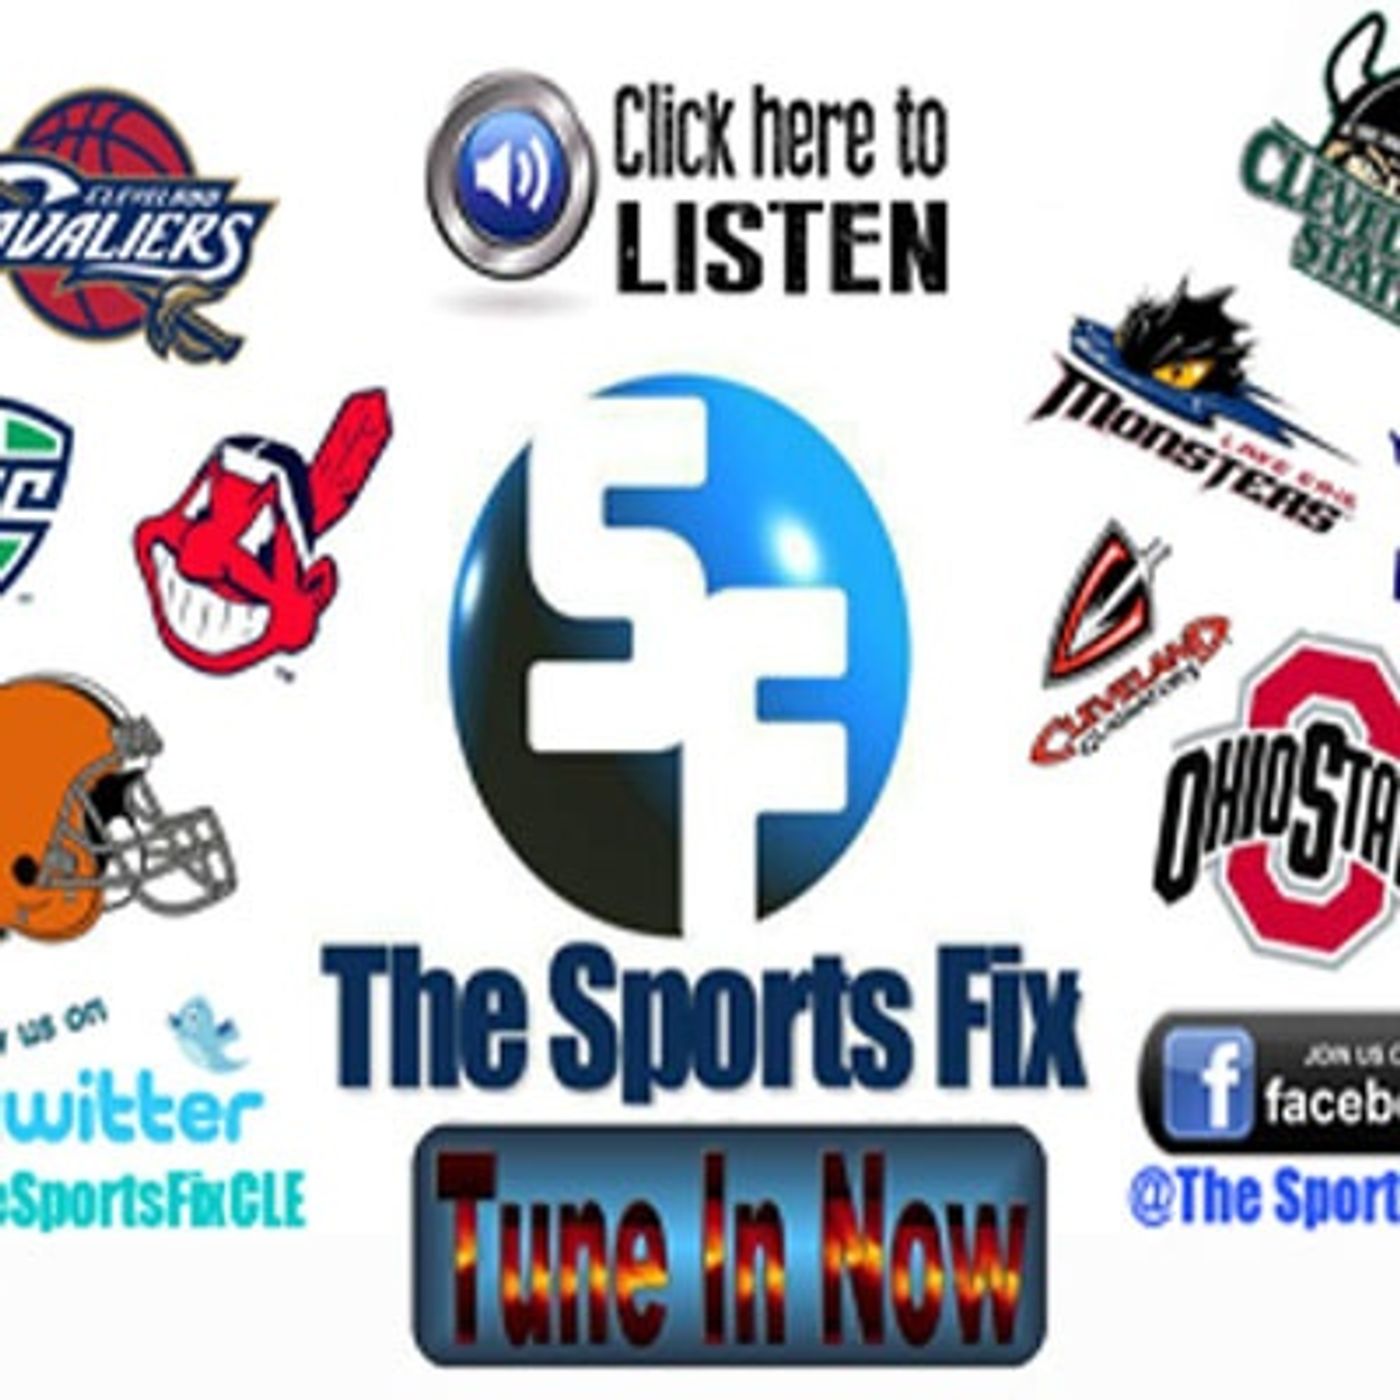 The Sports Fix - Weds Oct 14, 2015 Pt 1